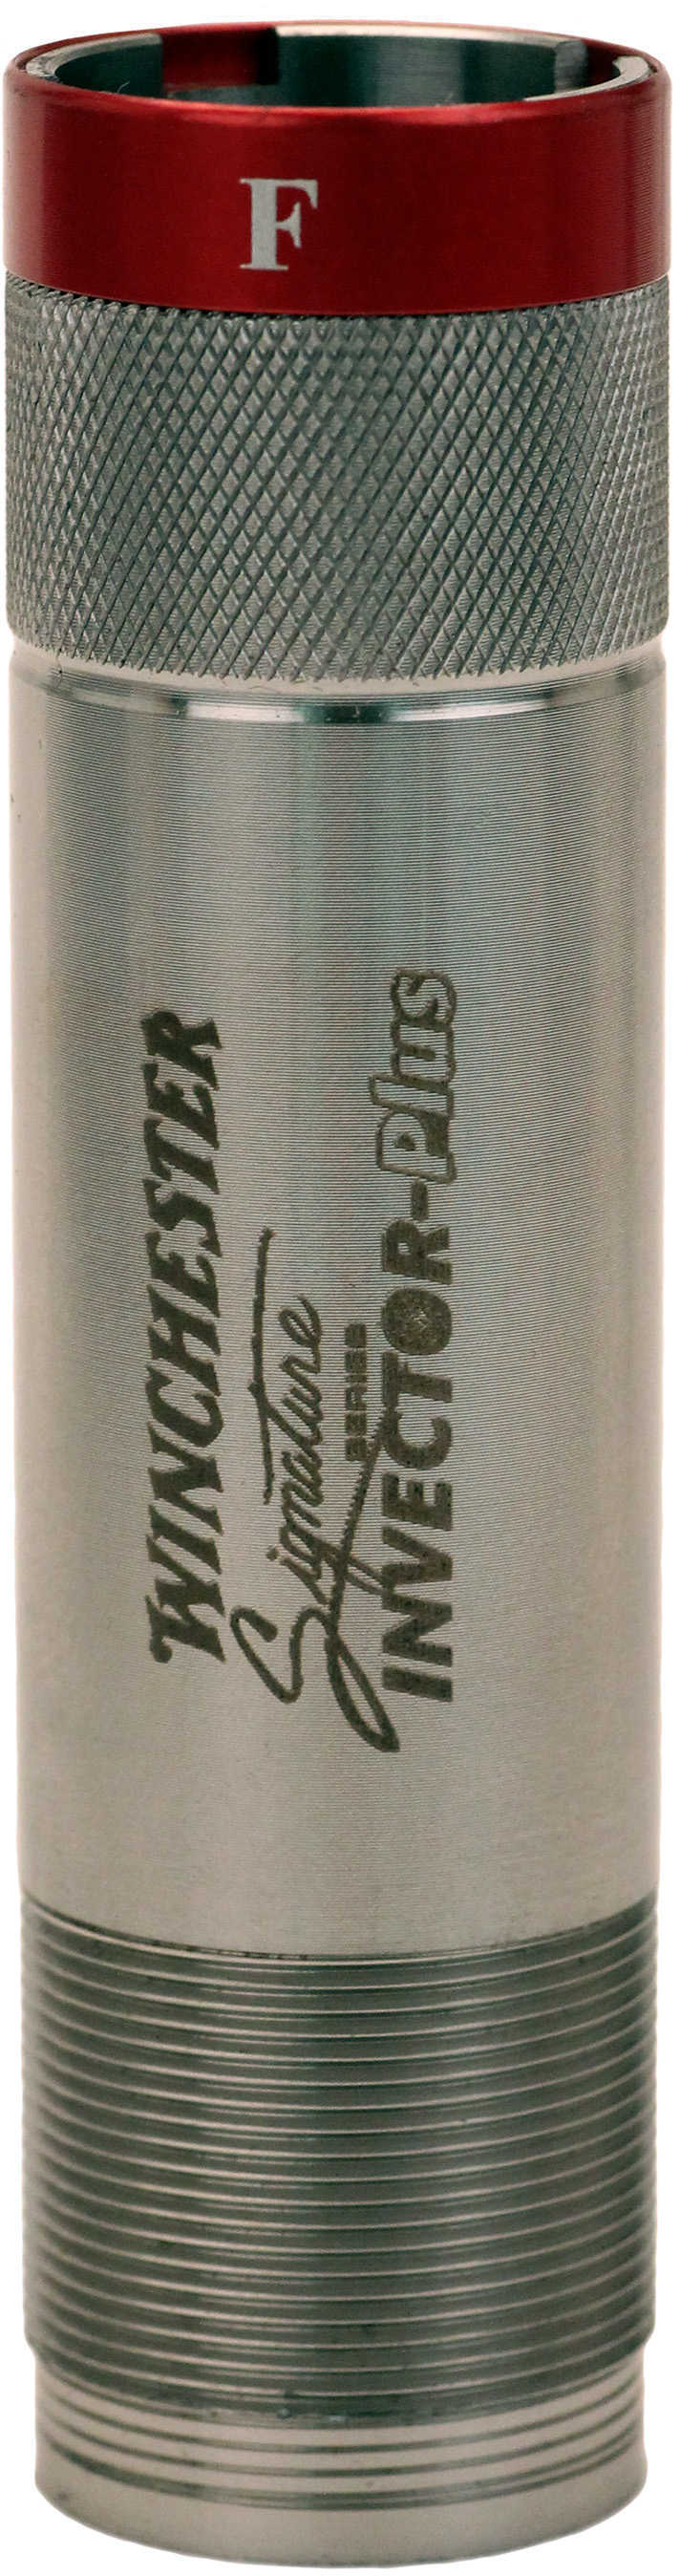 Winchester Guns 6130713 Signature Invector Plus Choke Tube Invector-Plus 12 Gauge Full 17-4 Stainless Steel